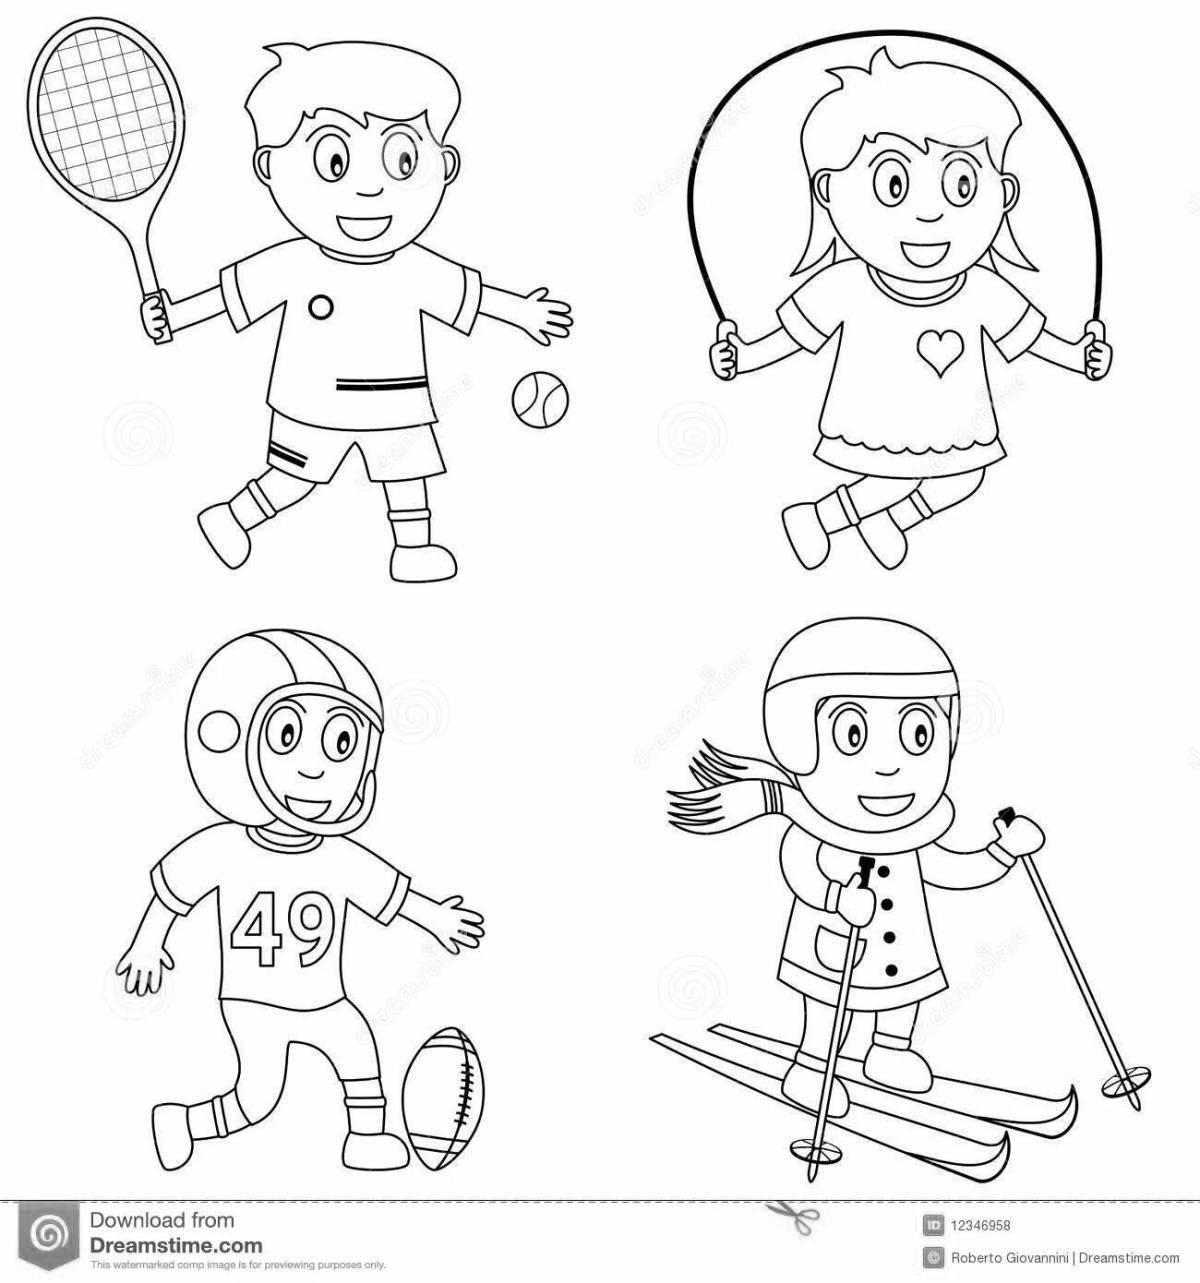 Fun coloring pages athletes of different sports for children